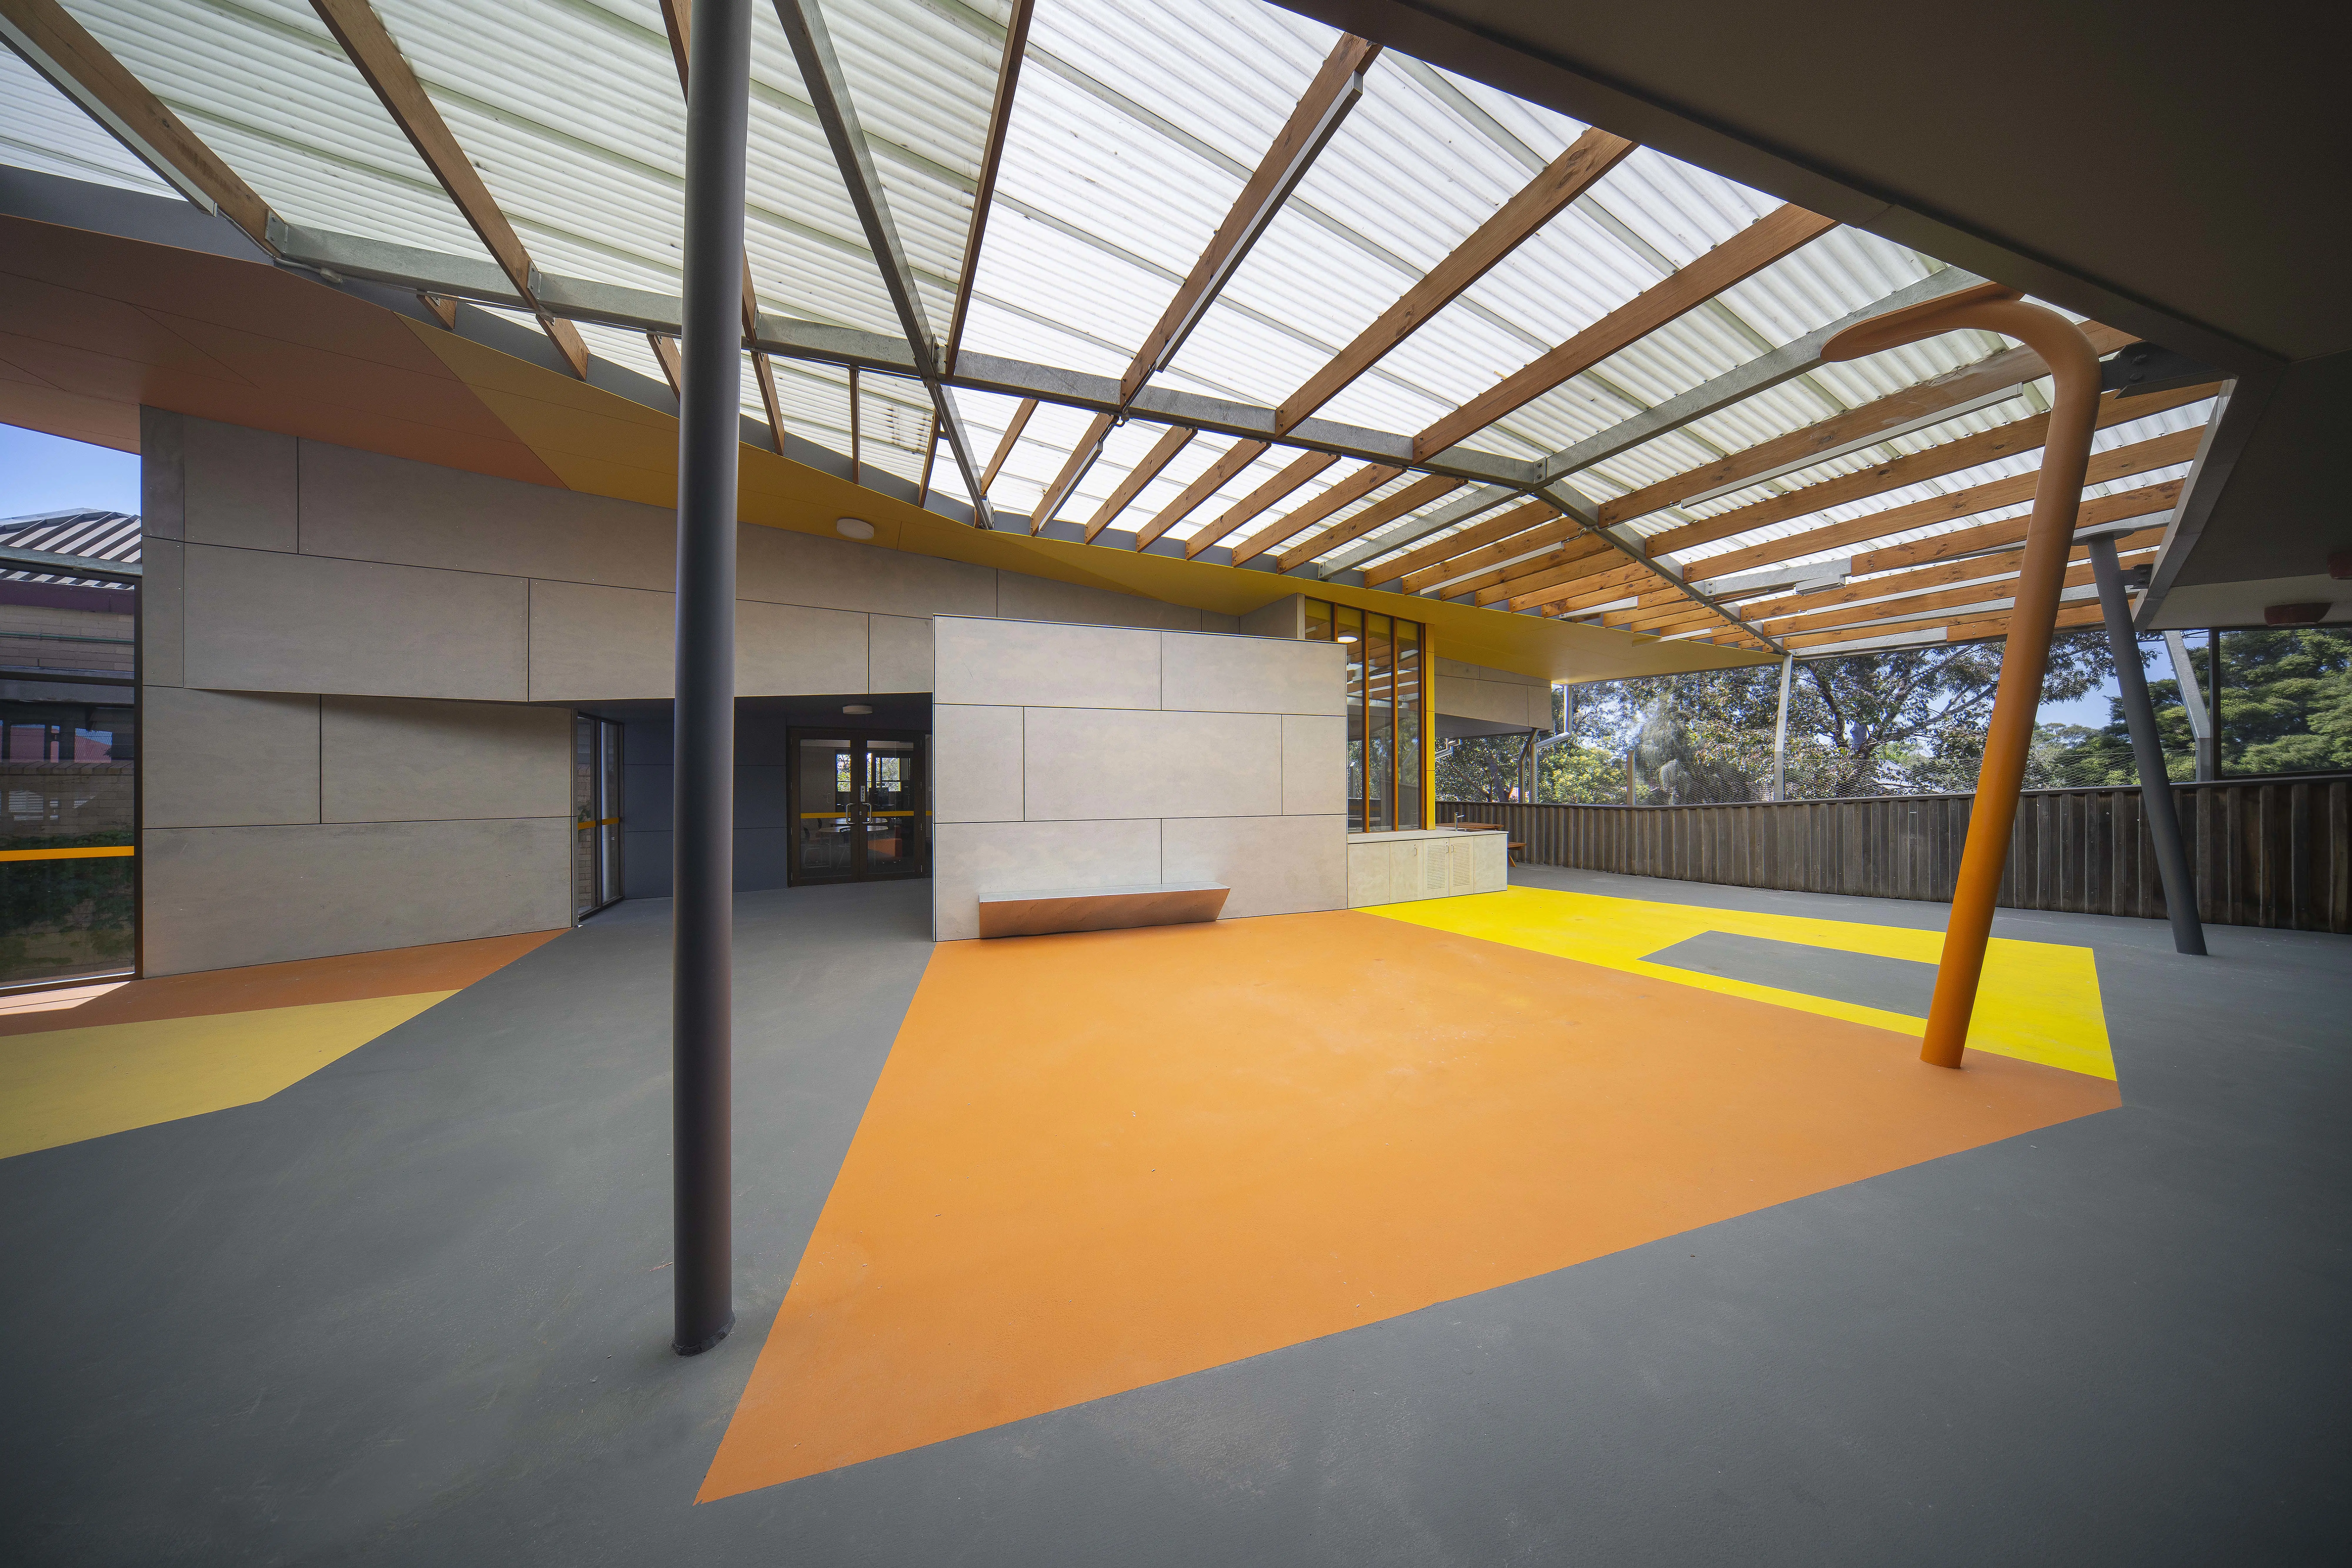 Undercover play area with orange, yellow and grey floor